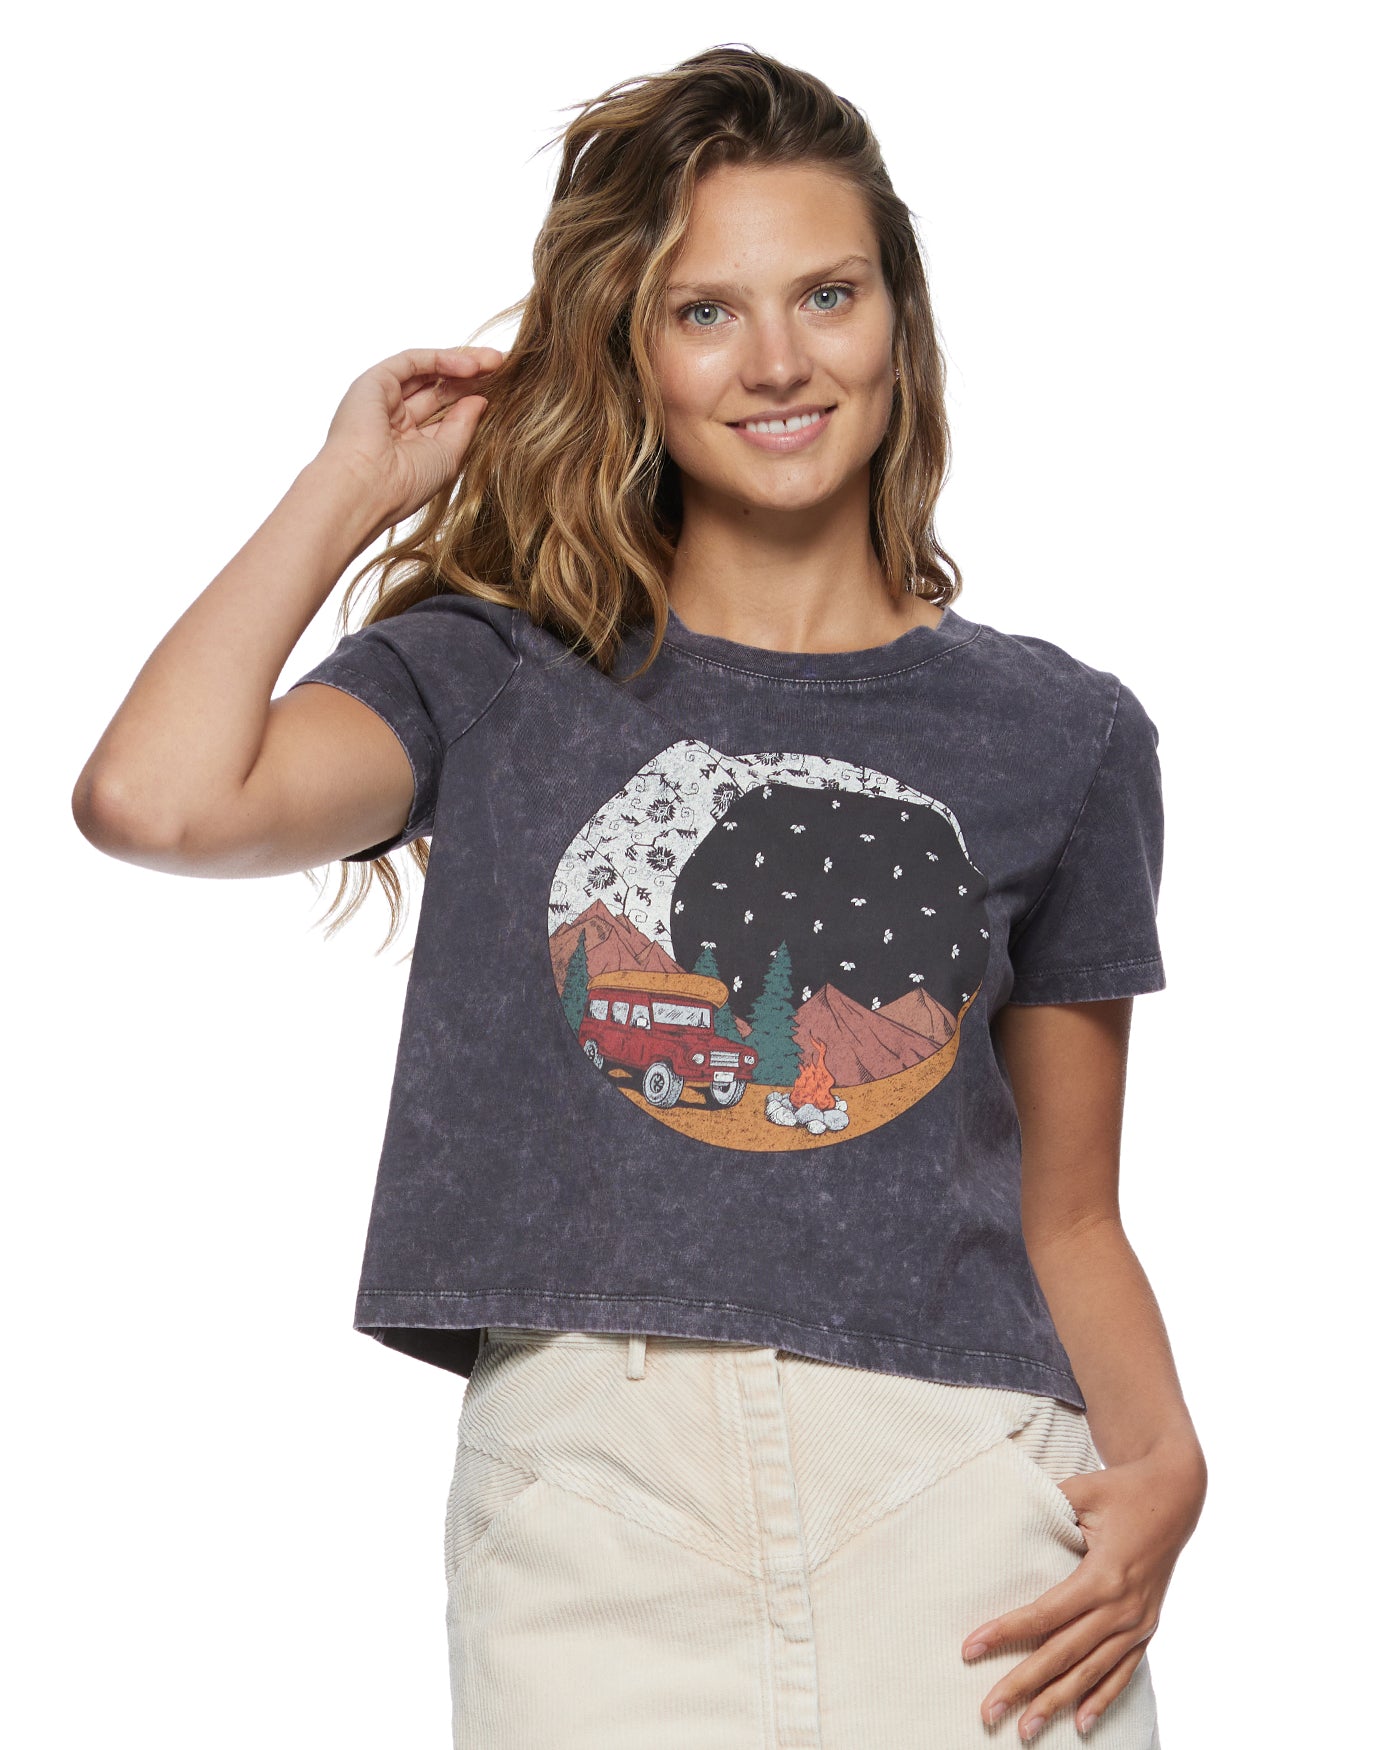 SOUTHWEST MOON CROPPED GRAPHIC TEE